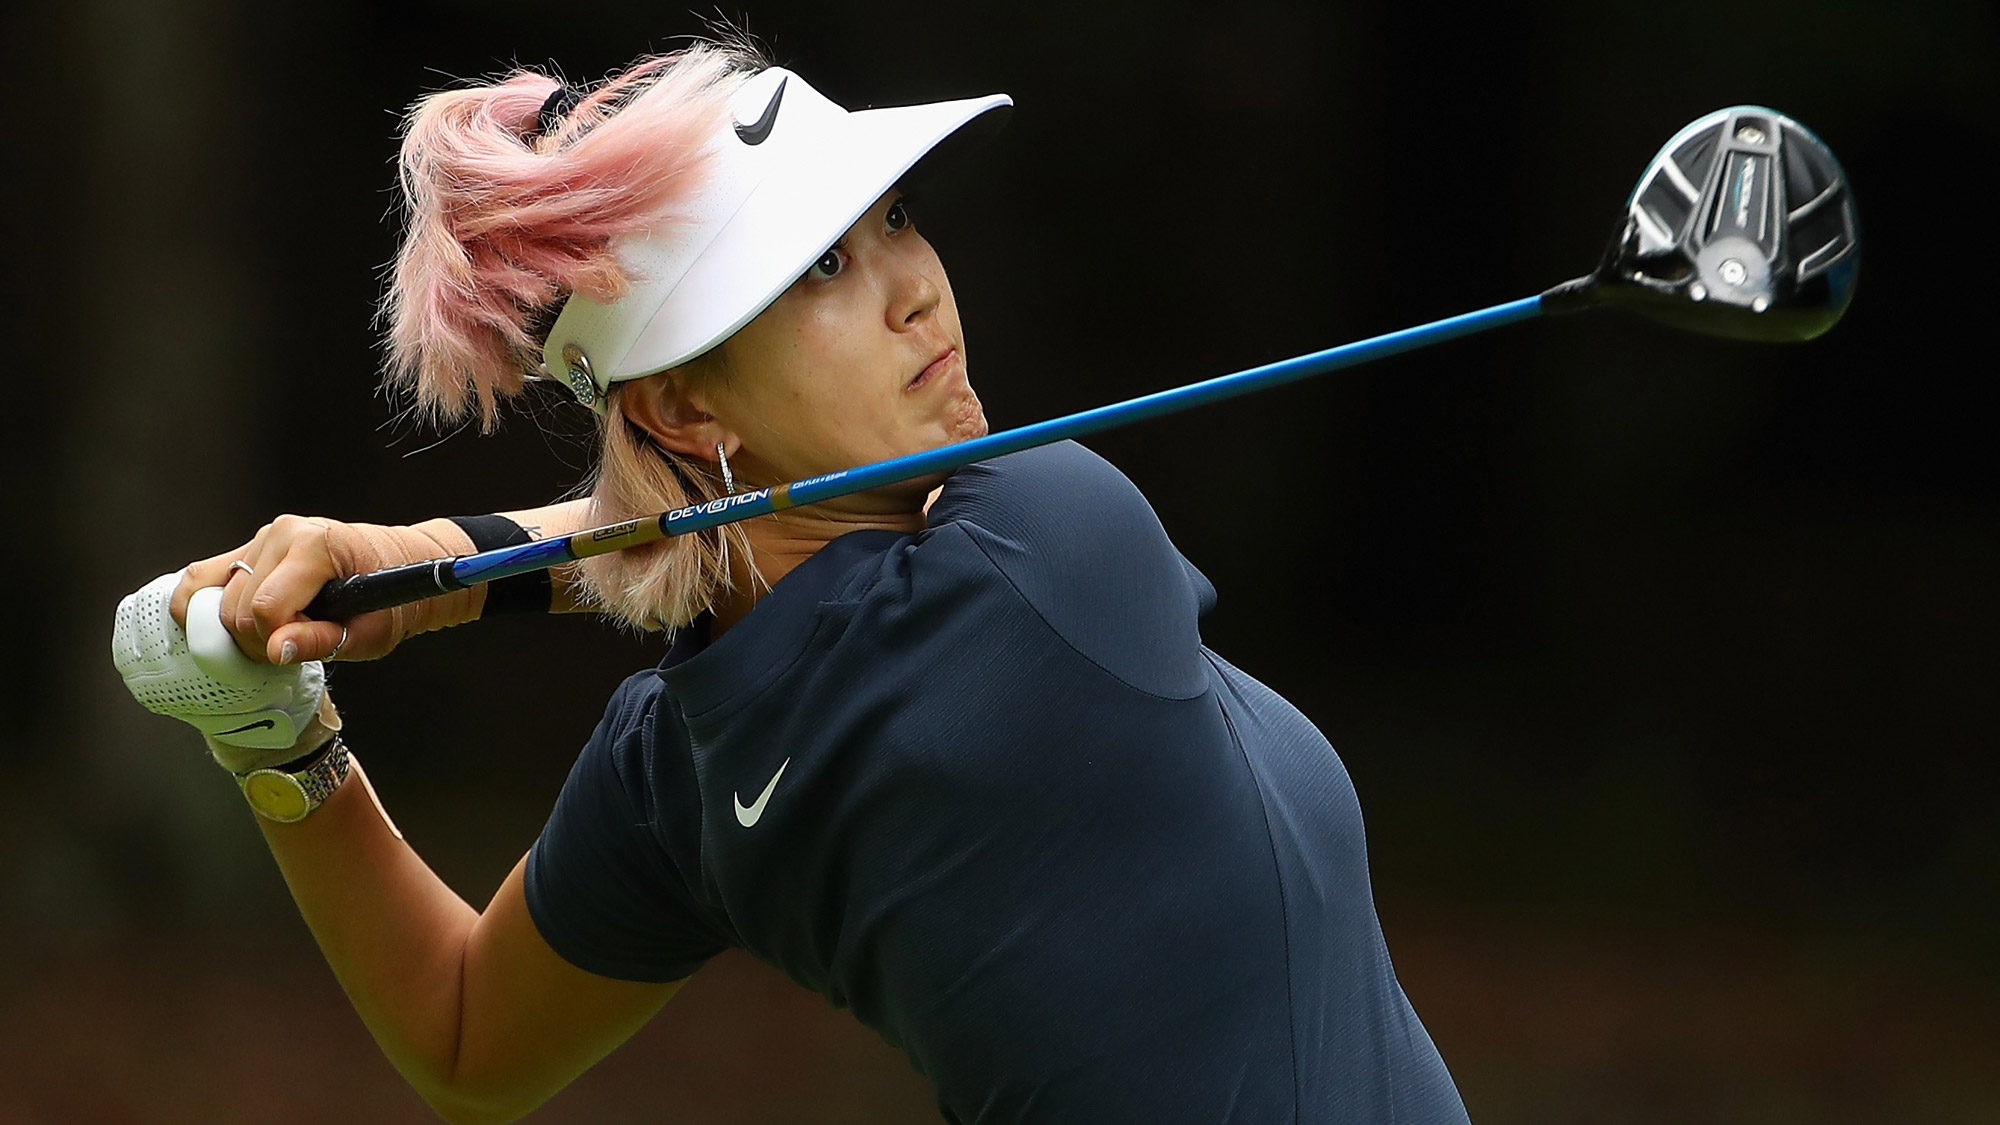 Michelle Wie Takes a Big Swing on Day One